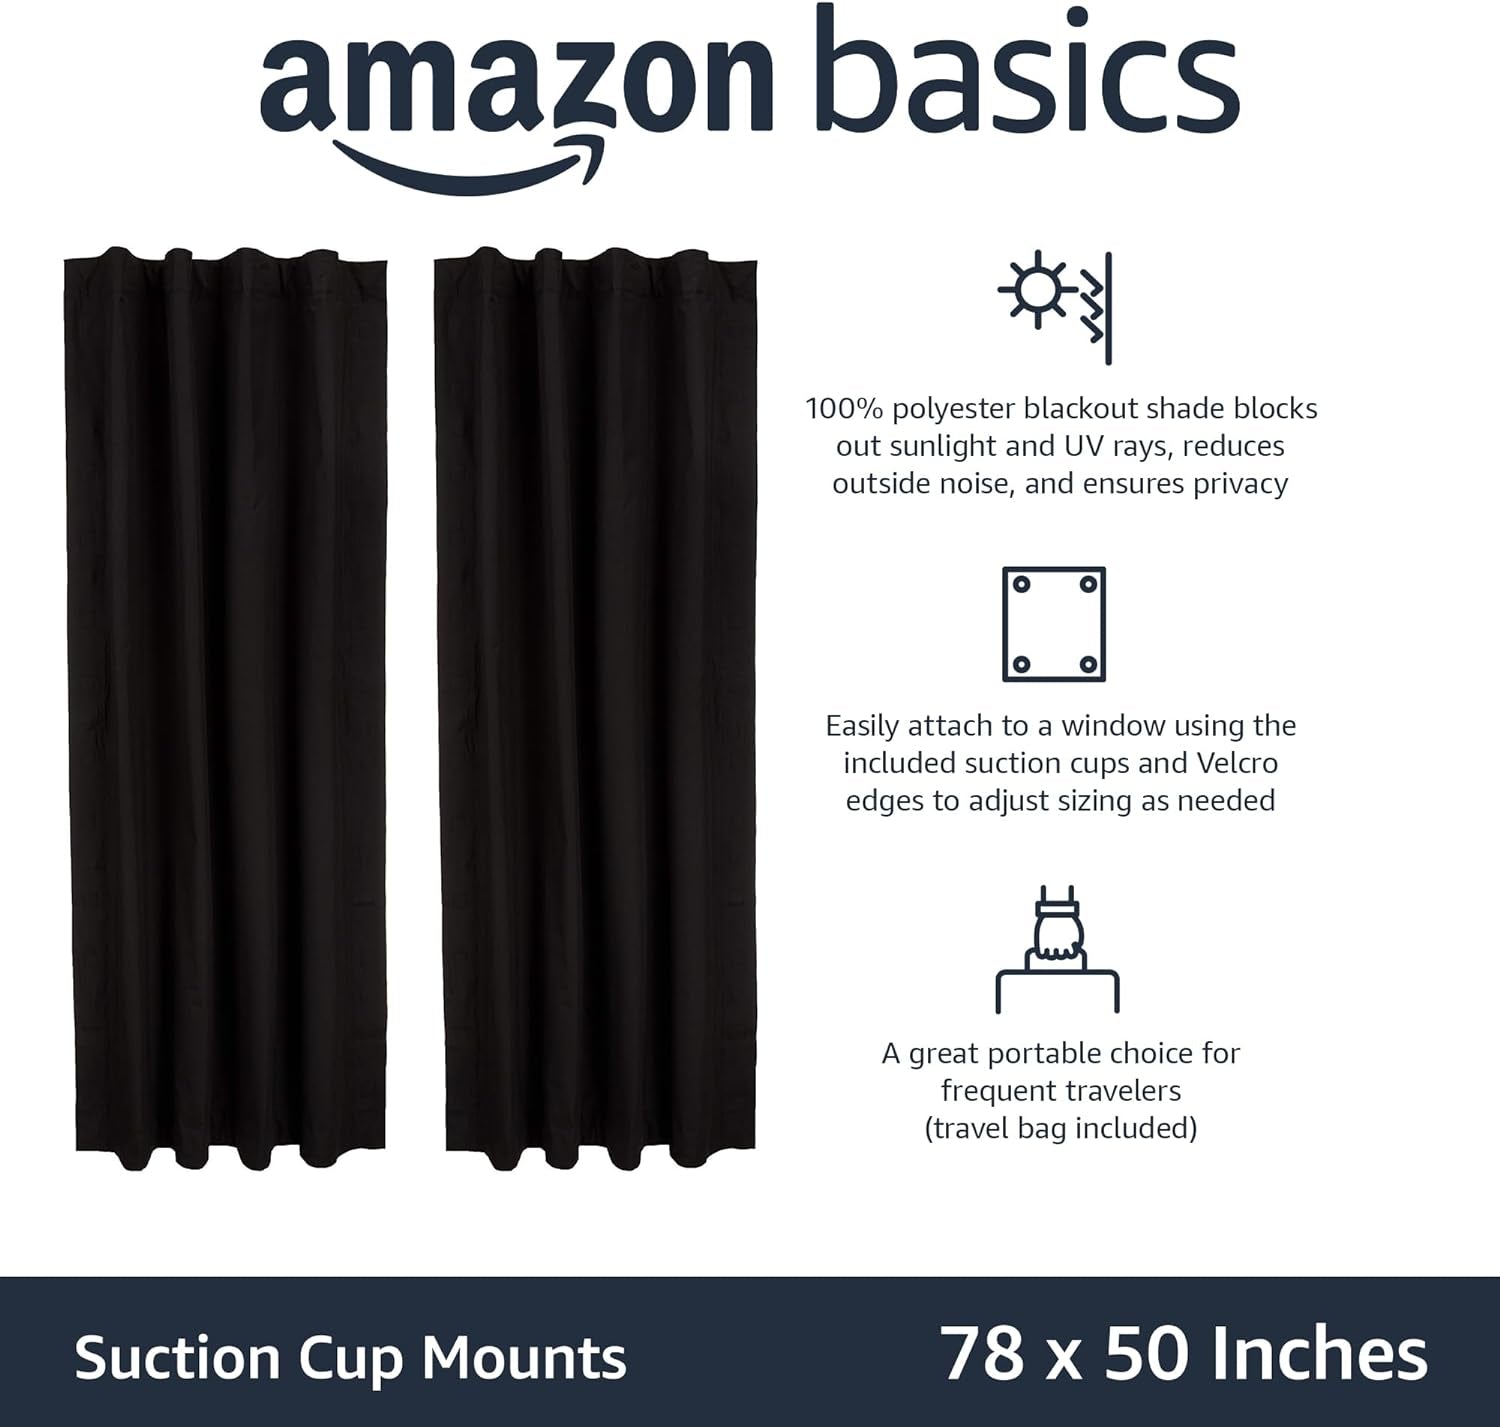 Amazon Basics Portable Window Blackout Curtain Shade with Suction Cups for Travel, 2-Pack, 78"L X 50"W, Black  Amazon Basics   